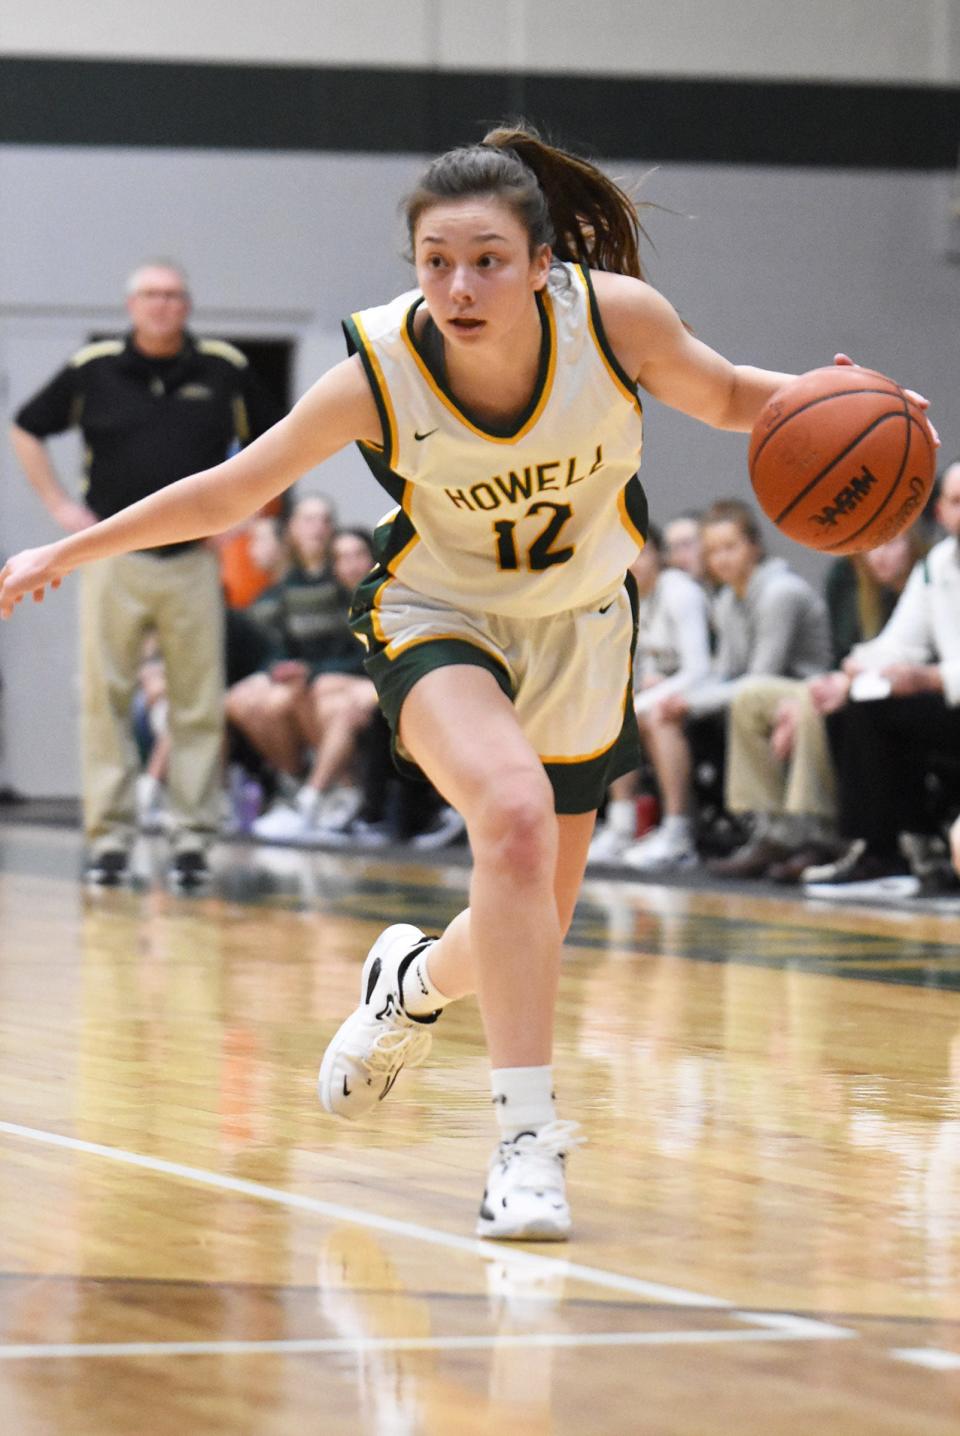 Molly Deurloo led Howell with 12.1 points and 7.2 rebounds per game.